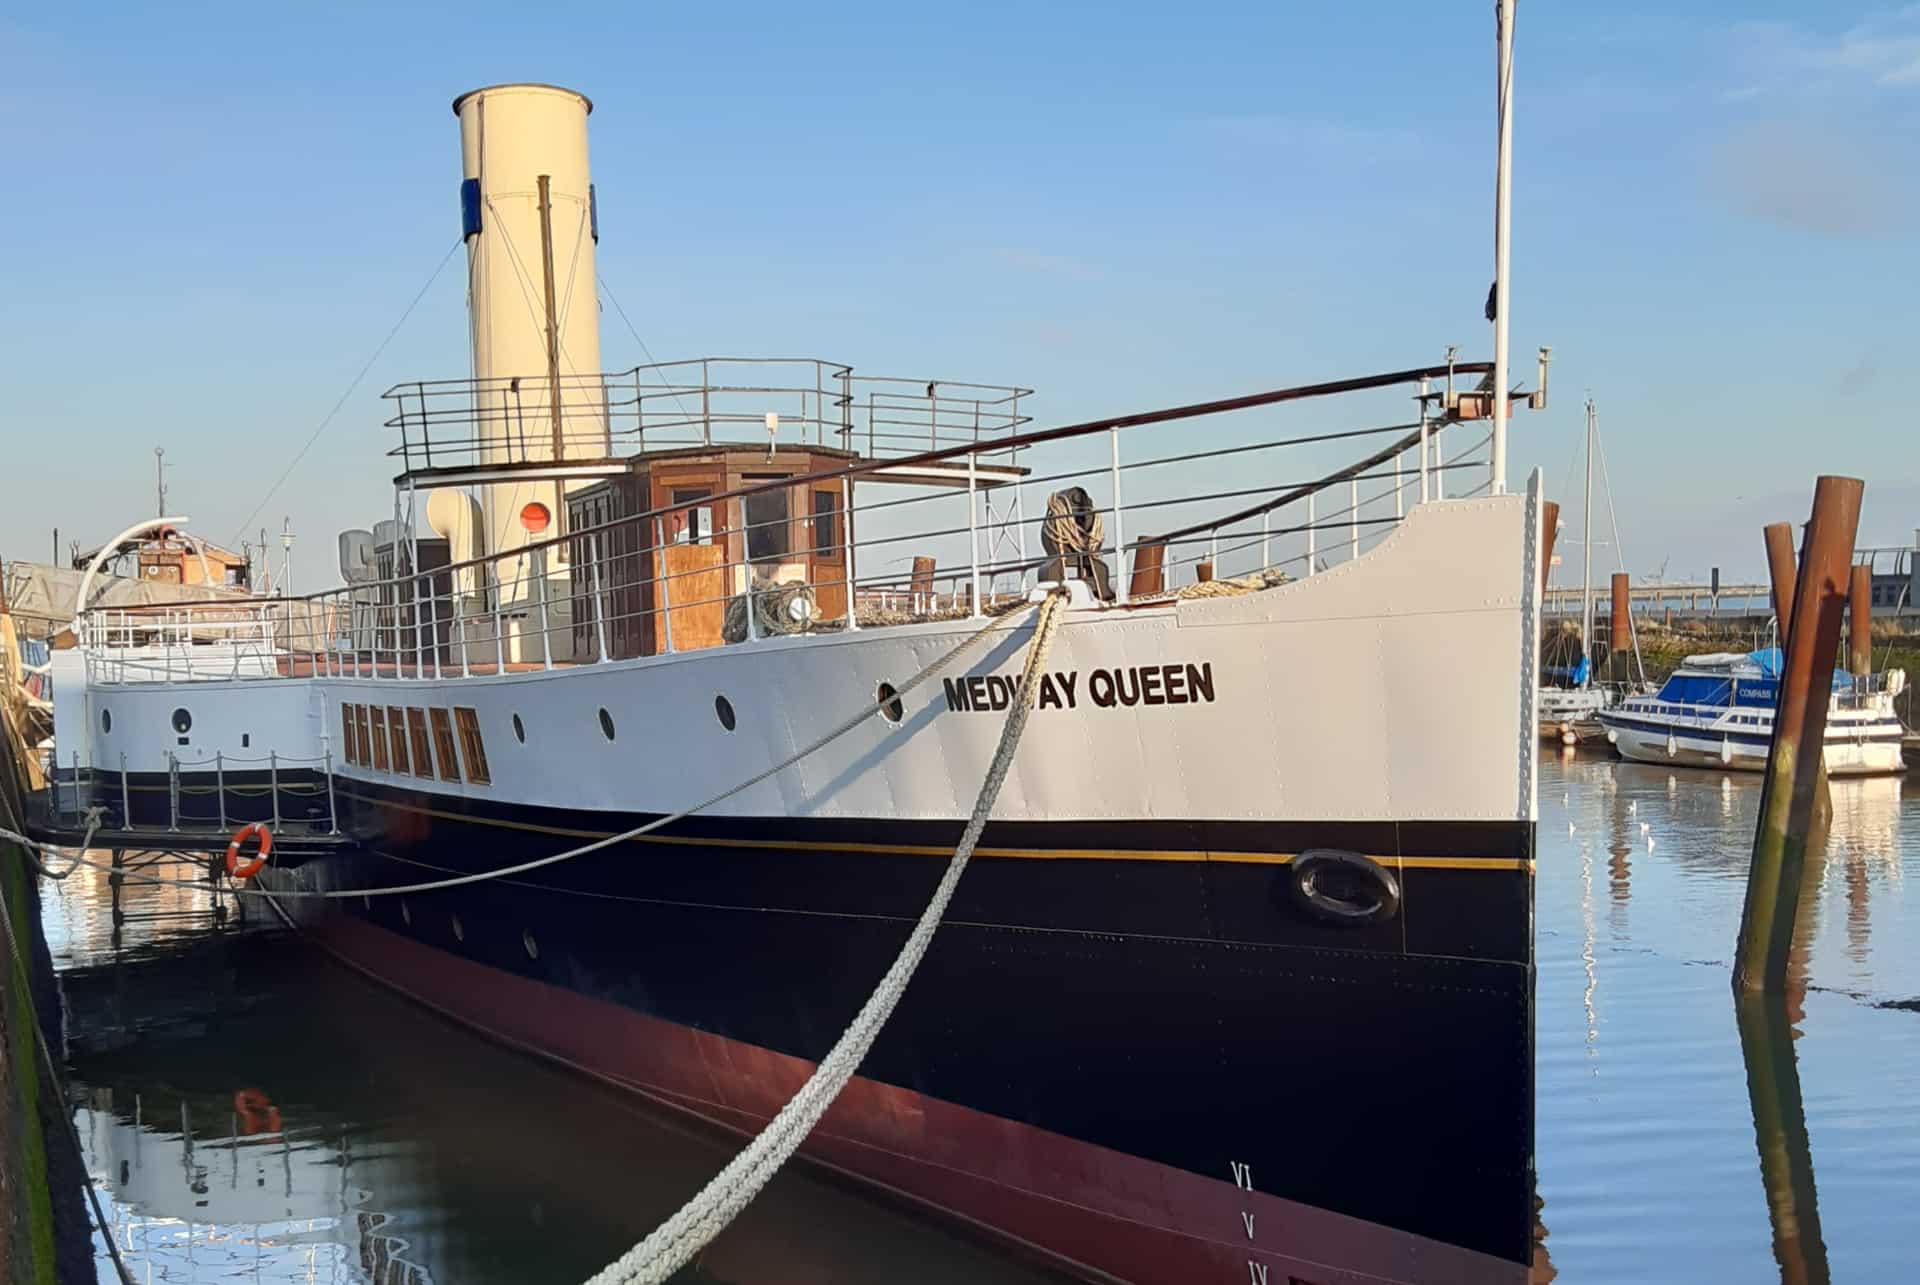 PS Medway Queen at Gillingham Pier - Martin Goodhew